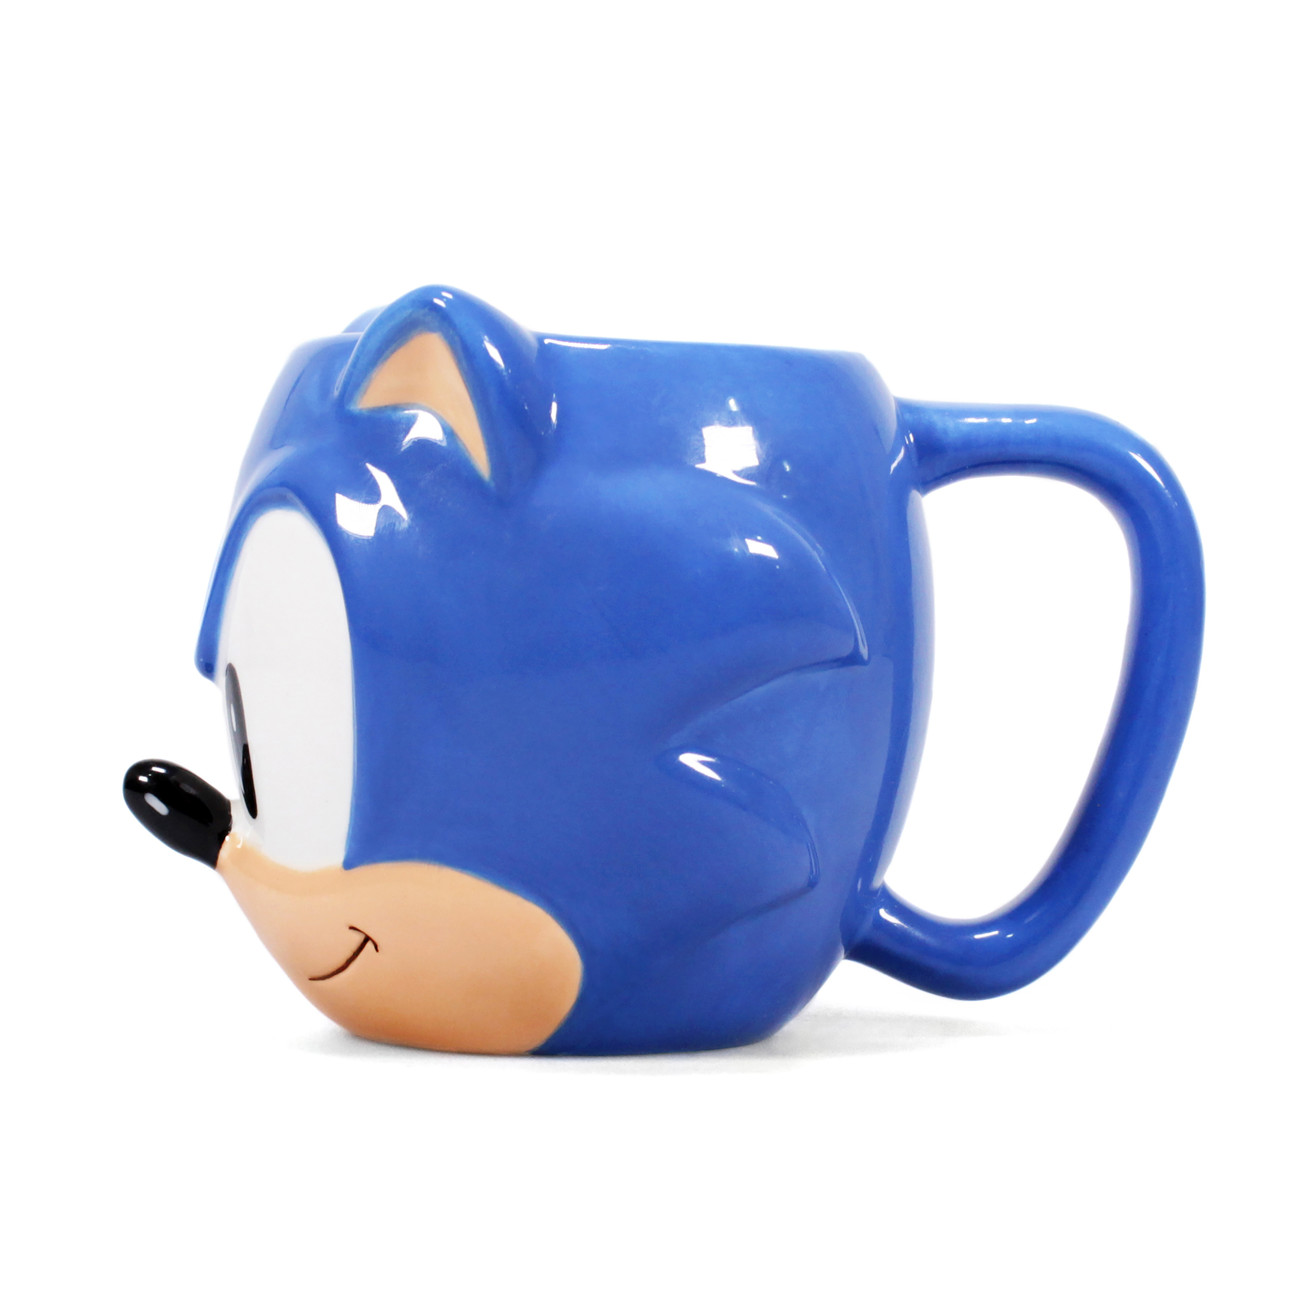 Sonic Mug Personalized Gifts Sonic the Hedgehog -  Norway